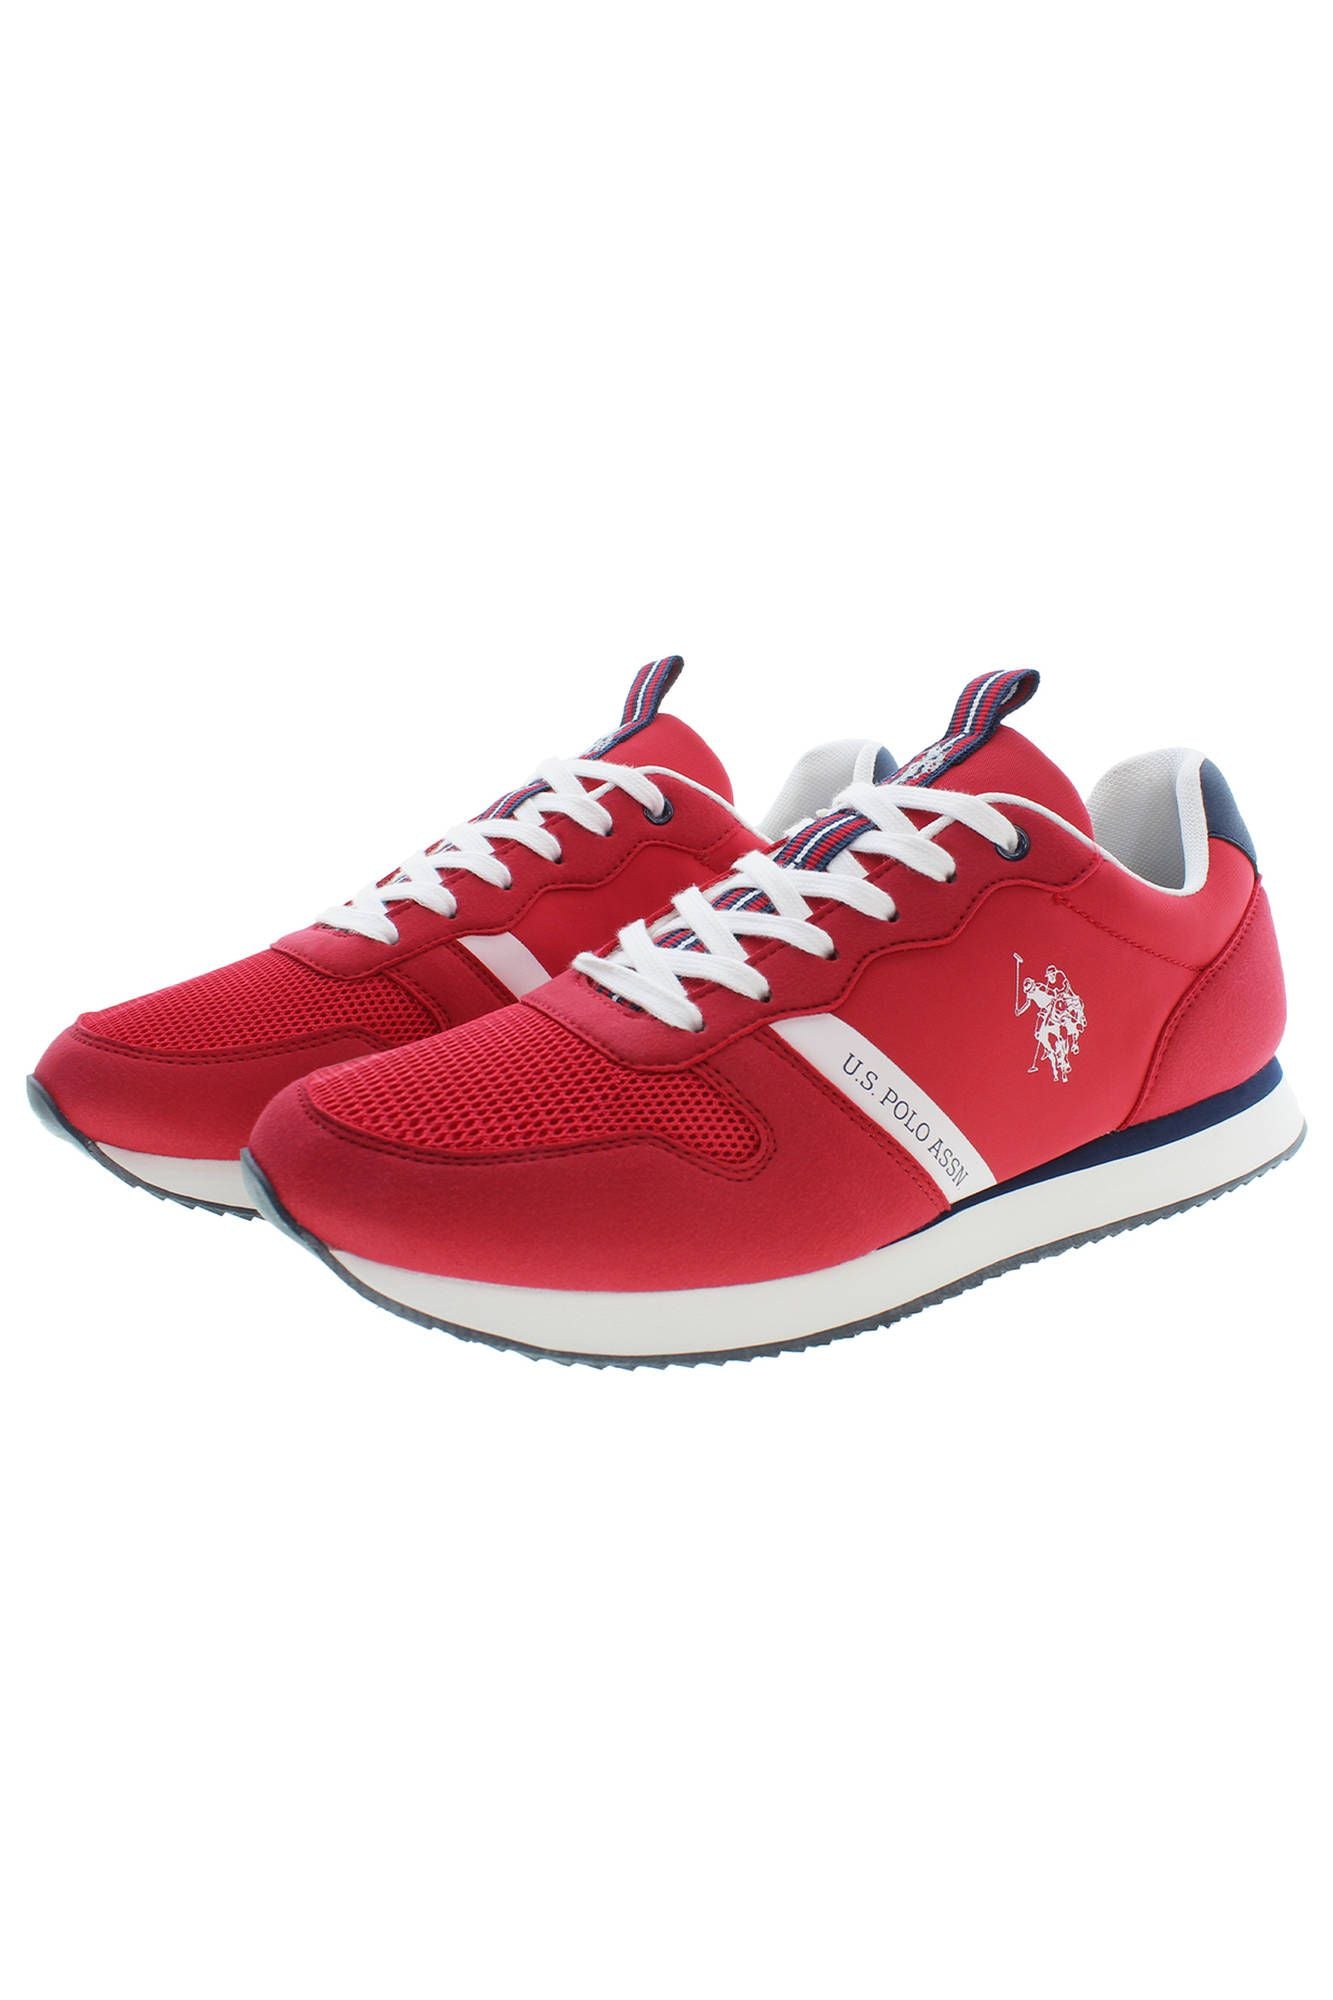 U.S. POLO ASSN. Chic Pink Lace-Up Sneakers with Contrasting Accents